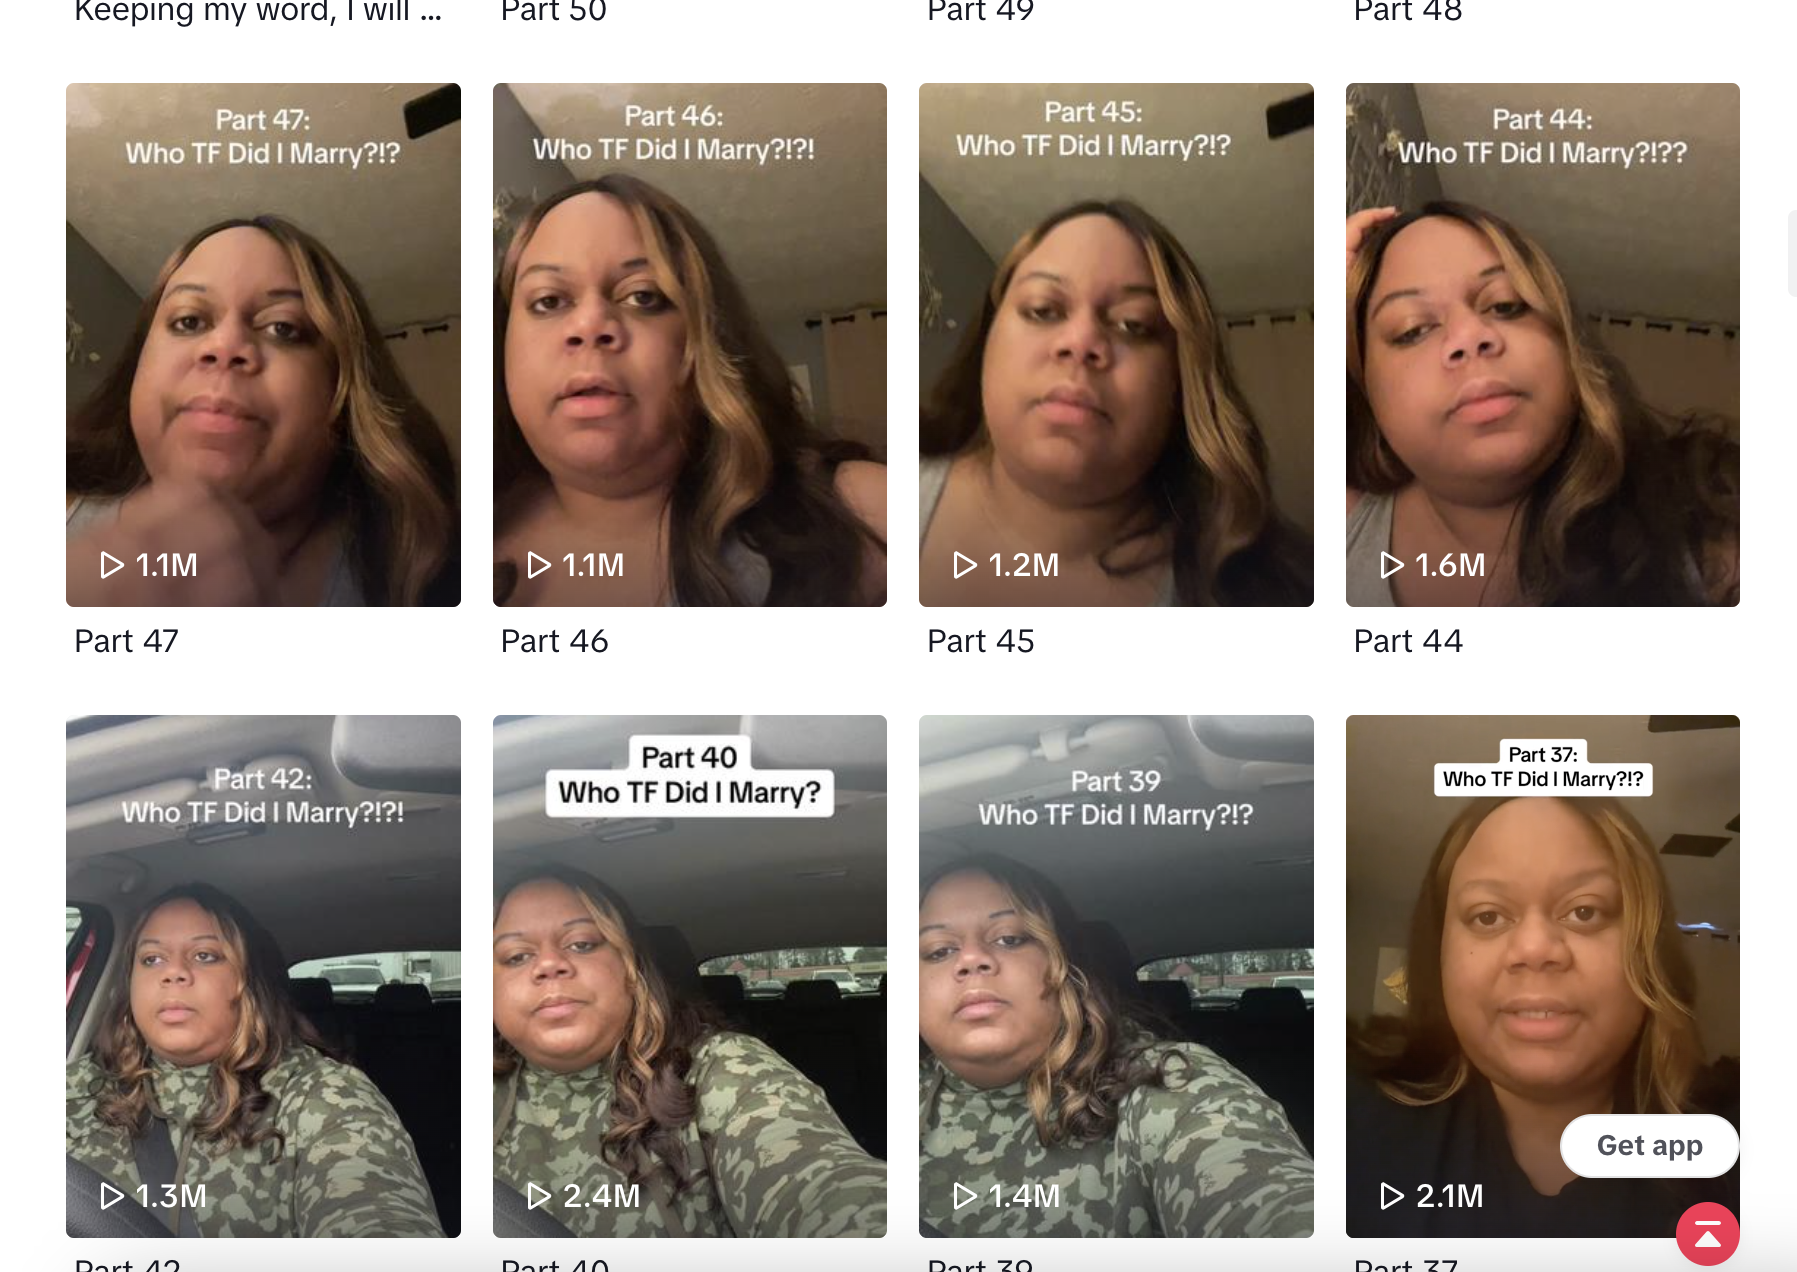 Multiple selfies of a woman with different expressions, related to a series on relationships